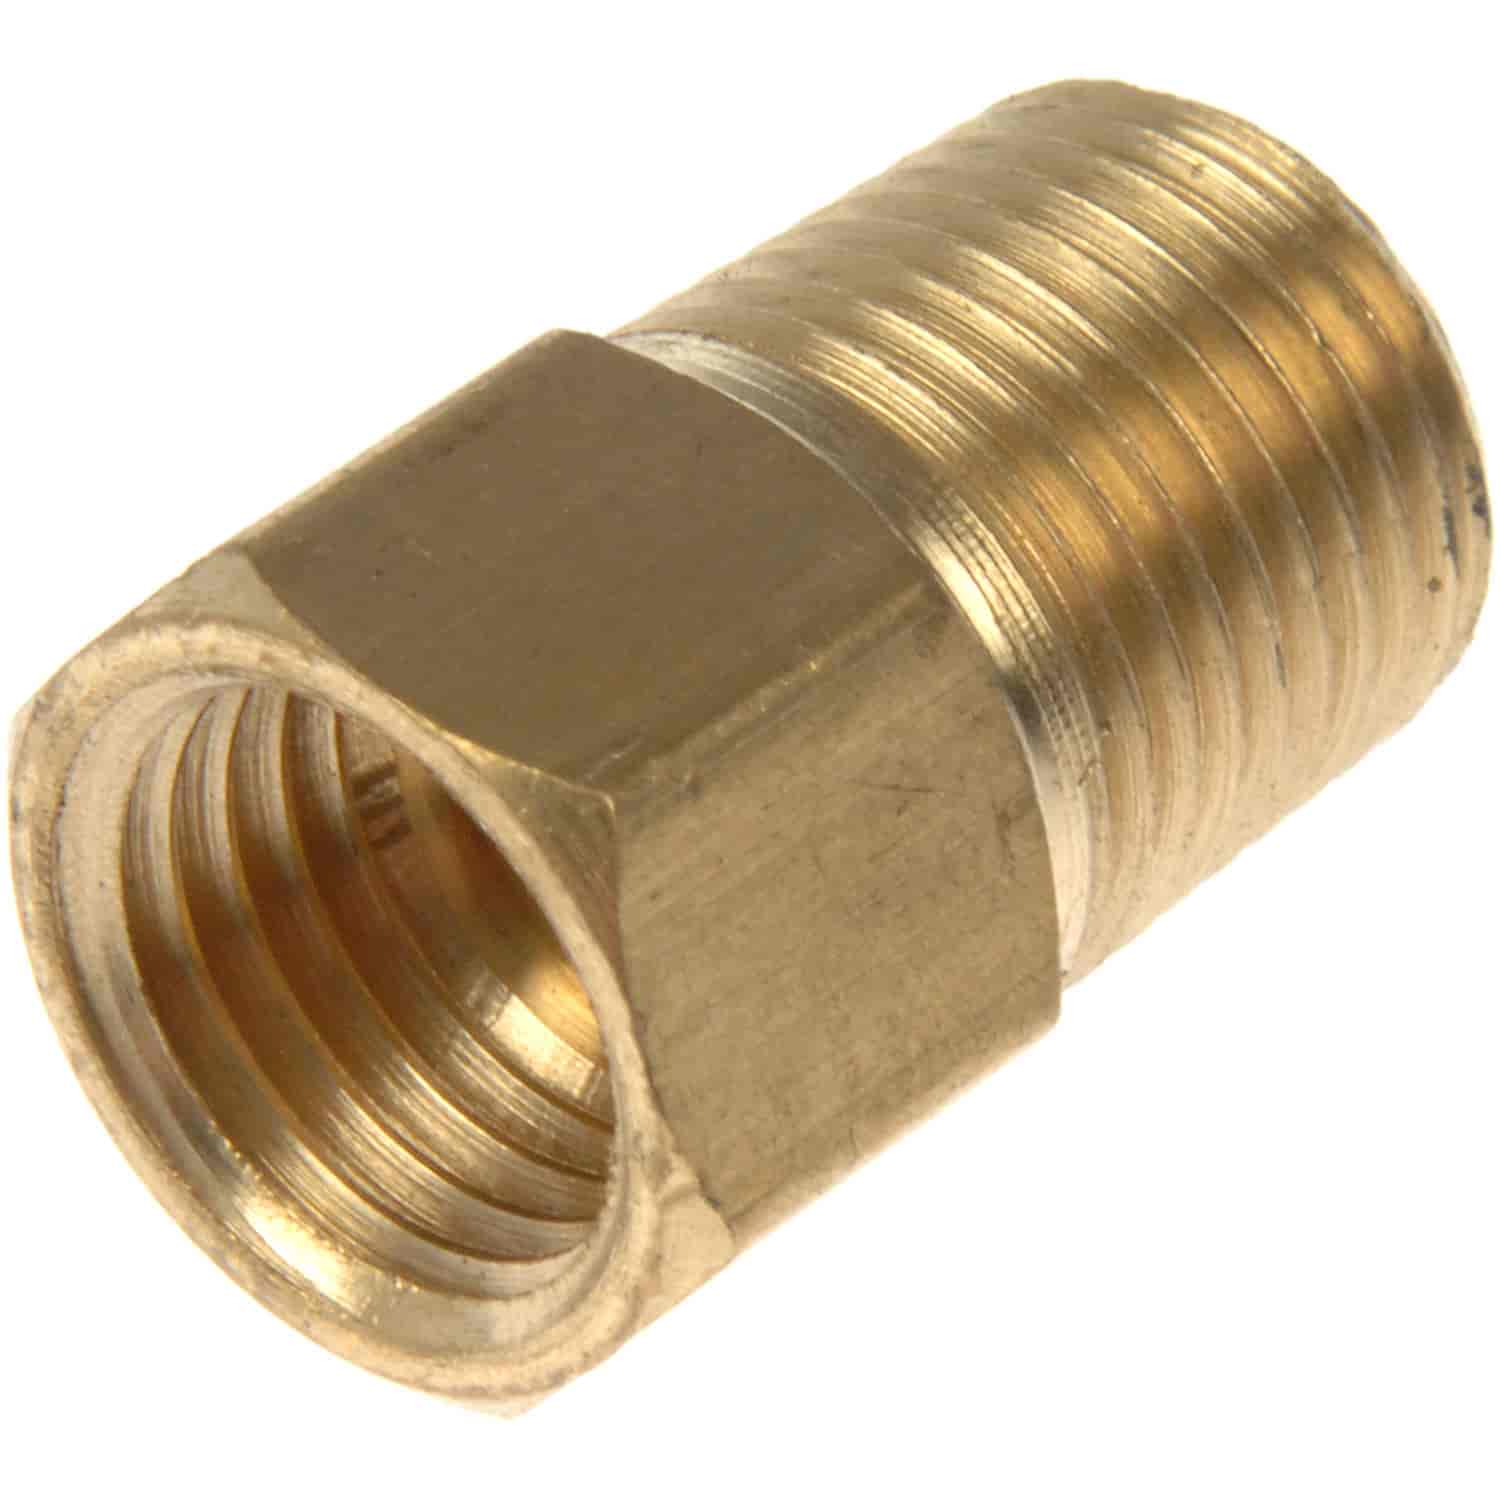 Inverted Flare Fitting, Male Connector, 5/16 in. x 1/4 in. MNPT